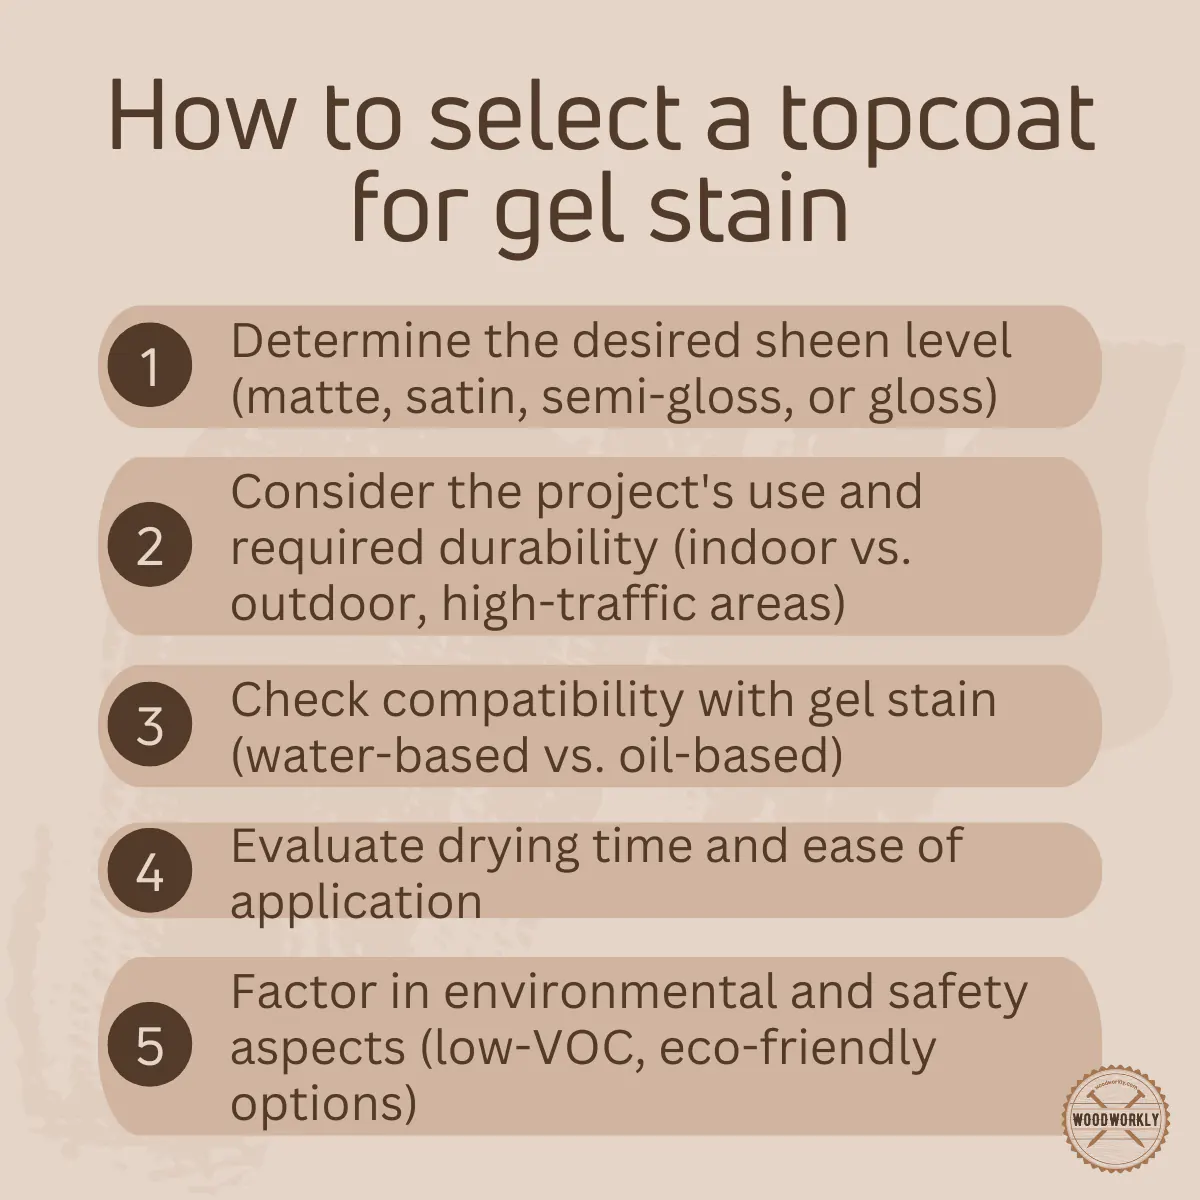 How to select a topcoat for gel stain